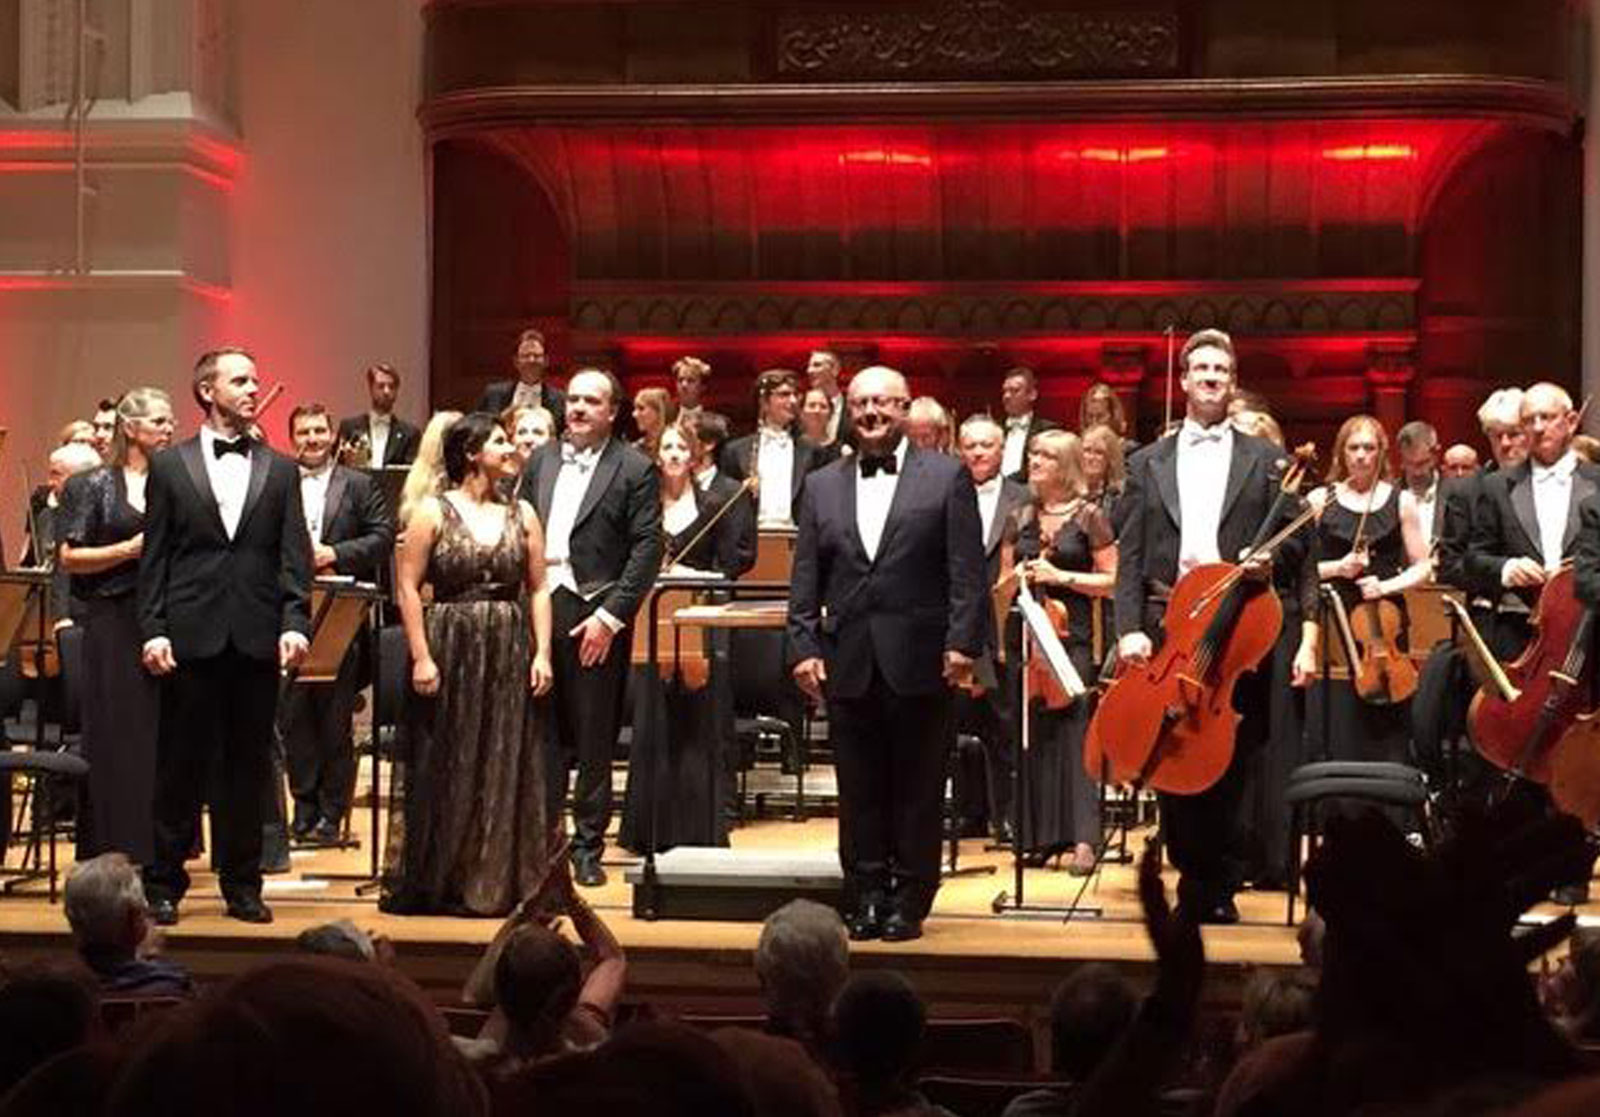 Reciving-a-standing-ovation-after-the-Gala-Concert-in-London-with-the-Royal-Philharmonic-Orchestra-conducted-by-Renato-Balsadonna-15-september-2016